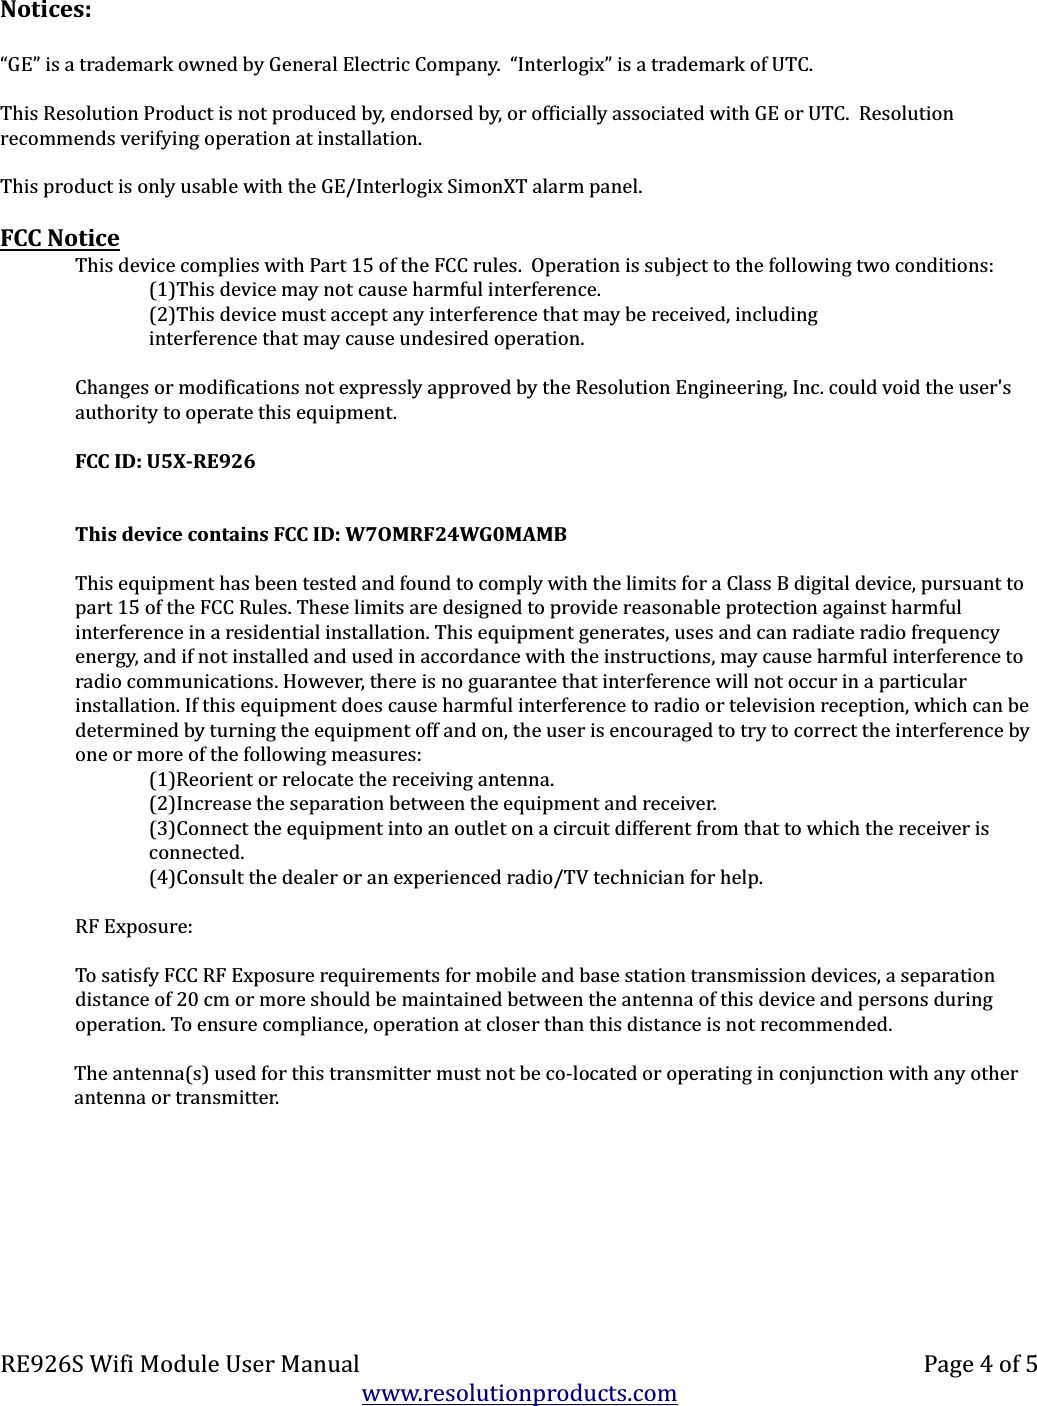 Notices:“GE” is a trademark owned by General Electric Company.  “Interlogix” is a trademark of UTC.This Resolution Product is not produced by, endorsed by, or officially associated with GE or UTC.  Resolution recommends verifying operation at installation.This product is only usable with the GE/Interlogix SimonXT alarm panel.FCC NoticeThis device complies with Part 15 of the FCC rules.  Operation is subject to the following two conditions:(1)This device may not cause harmful interference.(2)This device must accept any interference that may be received, includinginterference that may cause undesired operation.Changes or modifications not expressly approved by the Resolution Engineering, Inc. could void the user&apos;s authority to operate this equipment.FCC ID: U5X-RE926This device contains FCC ID: W7OMRF24WG0MAMBThis equipment has been tested and found to comply with the limits for a Class B digital device, pursuant to part 15 of the FCC Rules. These limits are designed to provide reasonable protection against harmful interference in a residential installation. This equipment generates, uses and can radiate radio frequency energy, and if not installed and used in accordance with the instructions, may cause harmful interference to radio communications. However, there is no guarantee that interference will not occur in a particular installation. If this equipment does cause harmful interference to radio or television reception, which can be determined by turning the equipment off and on, the user is encouraged to try to correct the interference by one or more of the following measures:(1)Reorient or relocate the receiving antenna.(2)Increase the separation between the equipment and receiver.(3)Connect the equipment into an outlet on a circuit different from that to which the receiver is connected.(4)Consult the dealer or an experienced radio/TV technician for help.RF Exposure:To satisfy FCC RF Exposure requirements for mobile and base station transmission devices, a separation distance of 20 cm or more should be maintained between the antenna of this device and persons during operation. To ensure compliance, operation at closer than this distance is not recommended.The antenna(s) used for this transmitter must not be co-located or operating in conjunction with any other antenna or transmitter.RE926S Wifi Module User Manual Page 4 of 5www.resolutionproducts.com